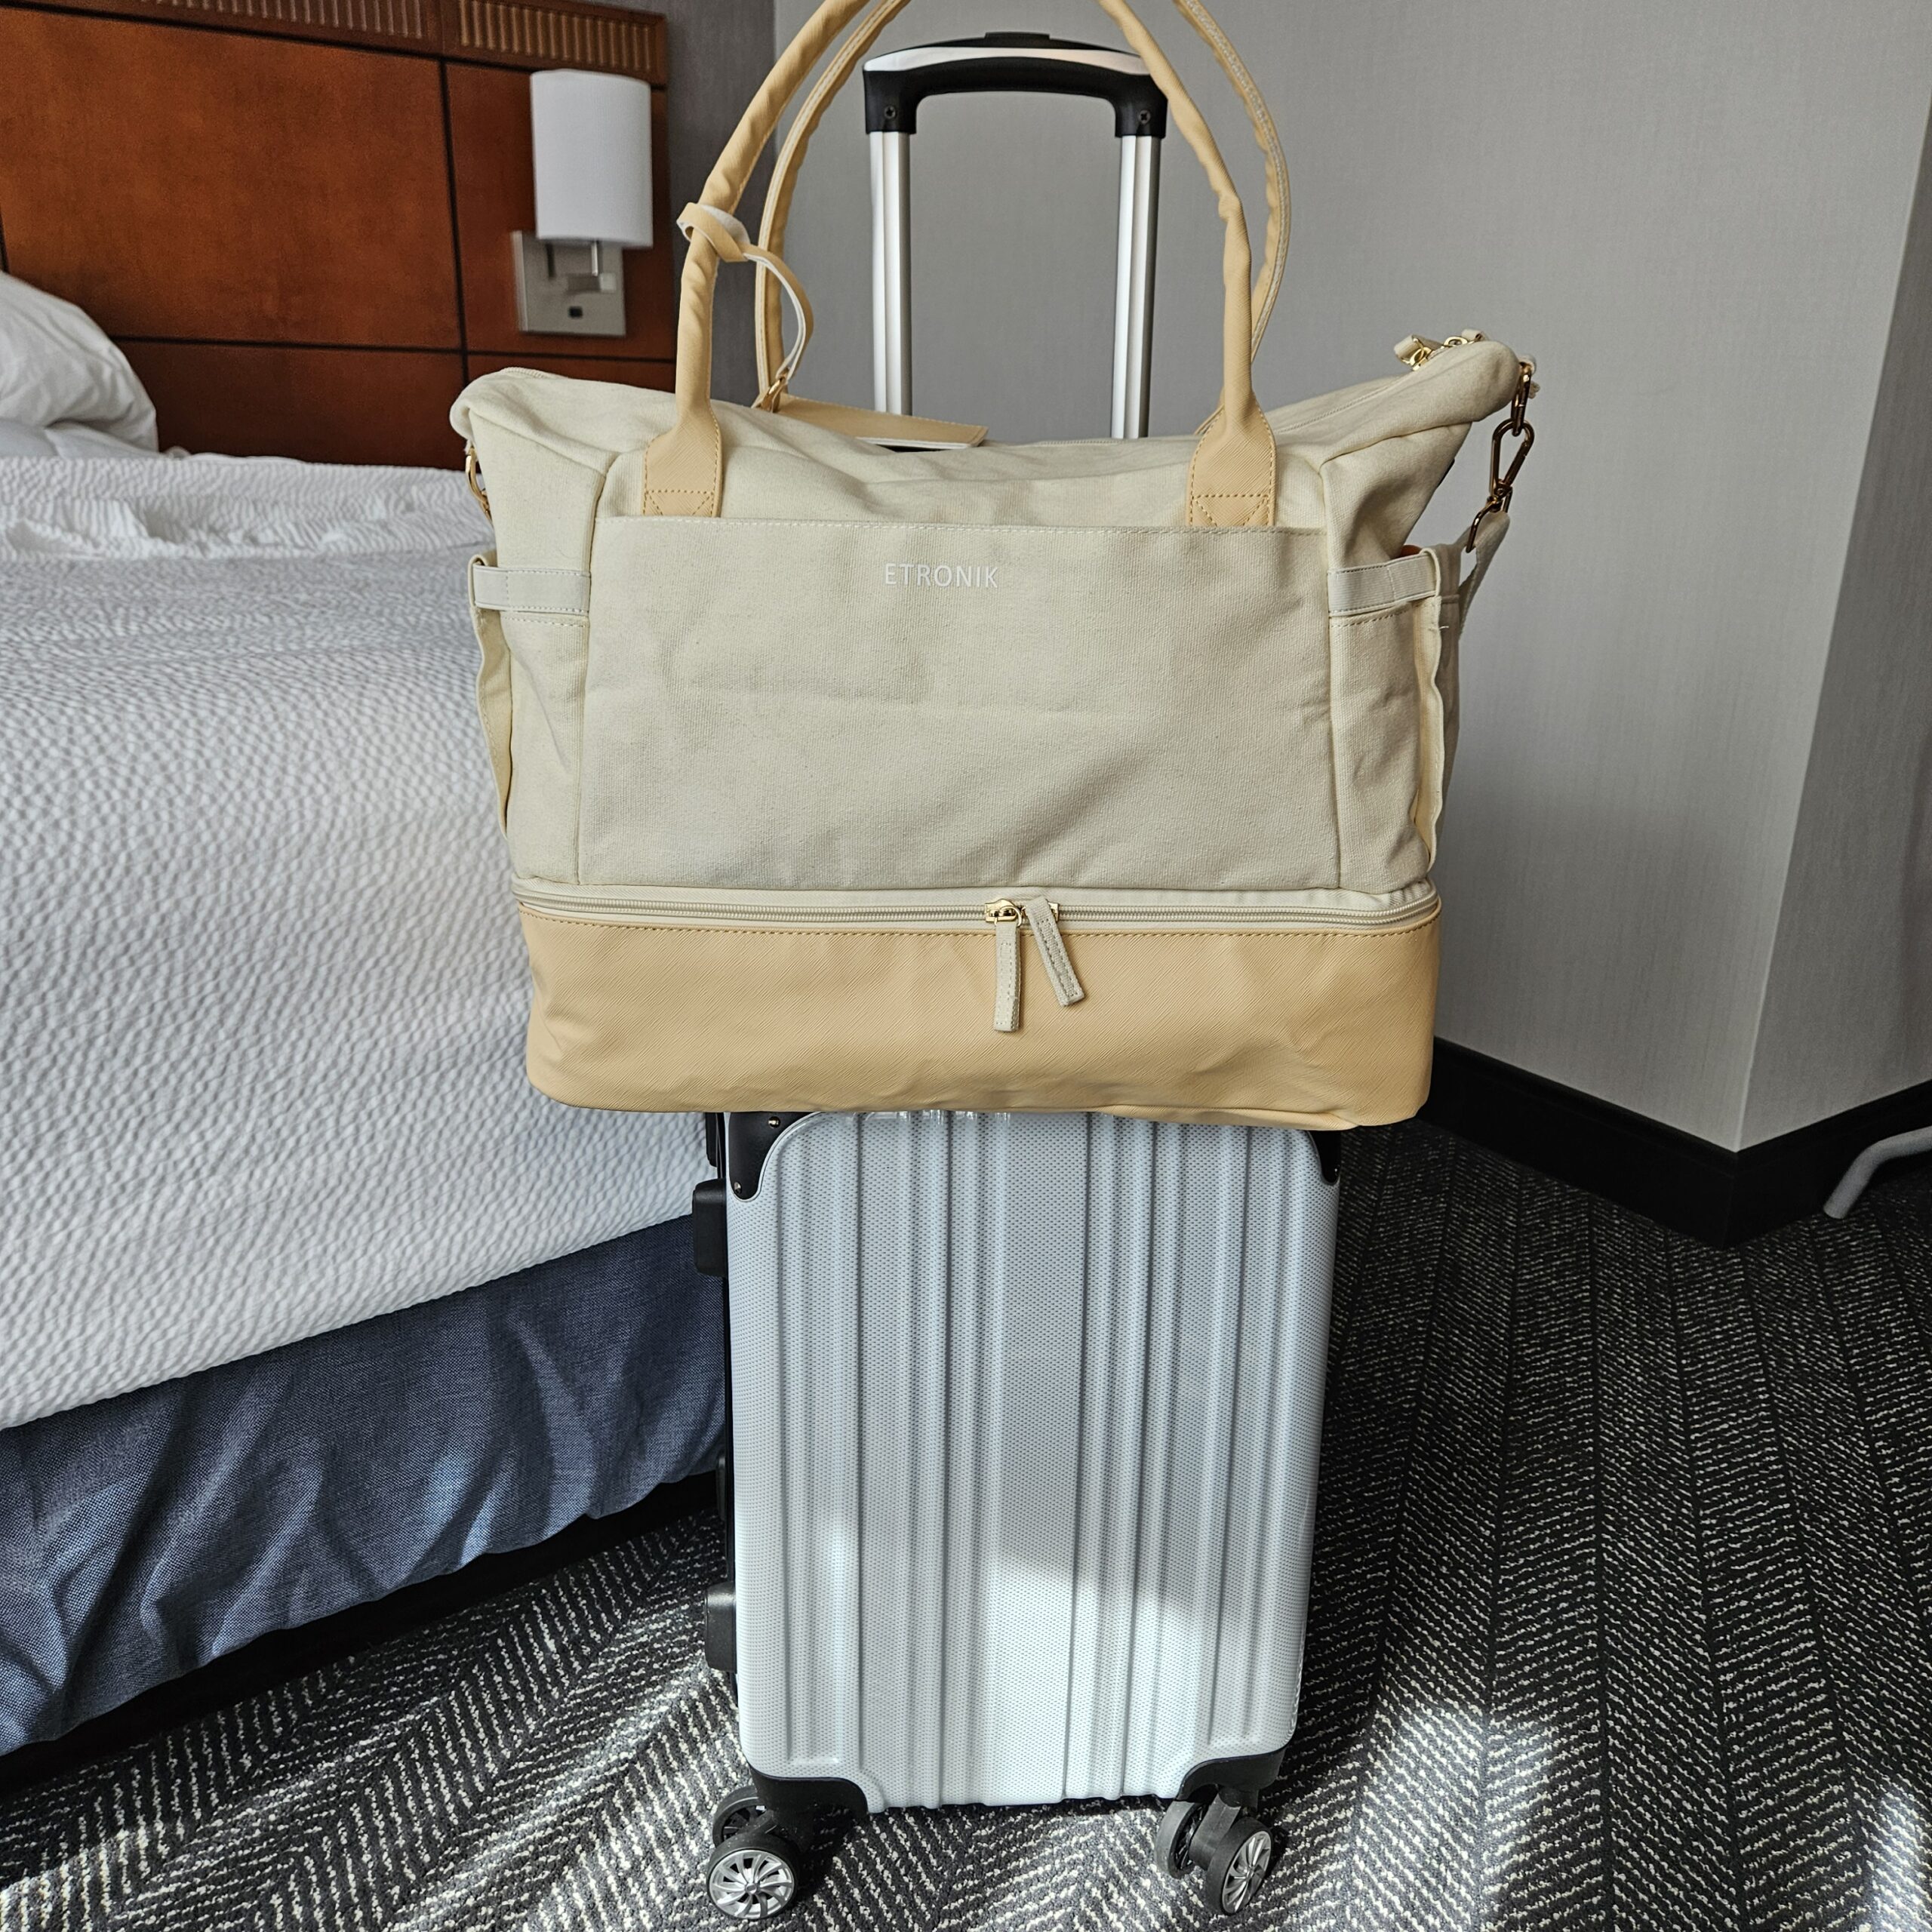 Read more about the article Travel Favorites – Quick Trip Carry On Luggage